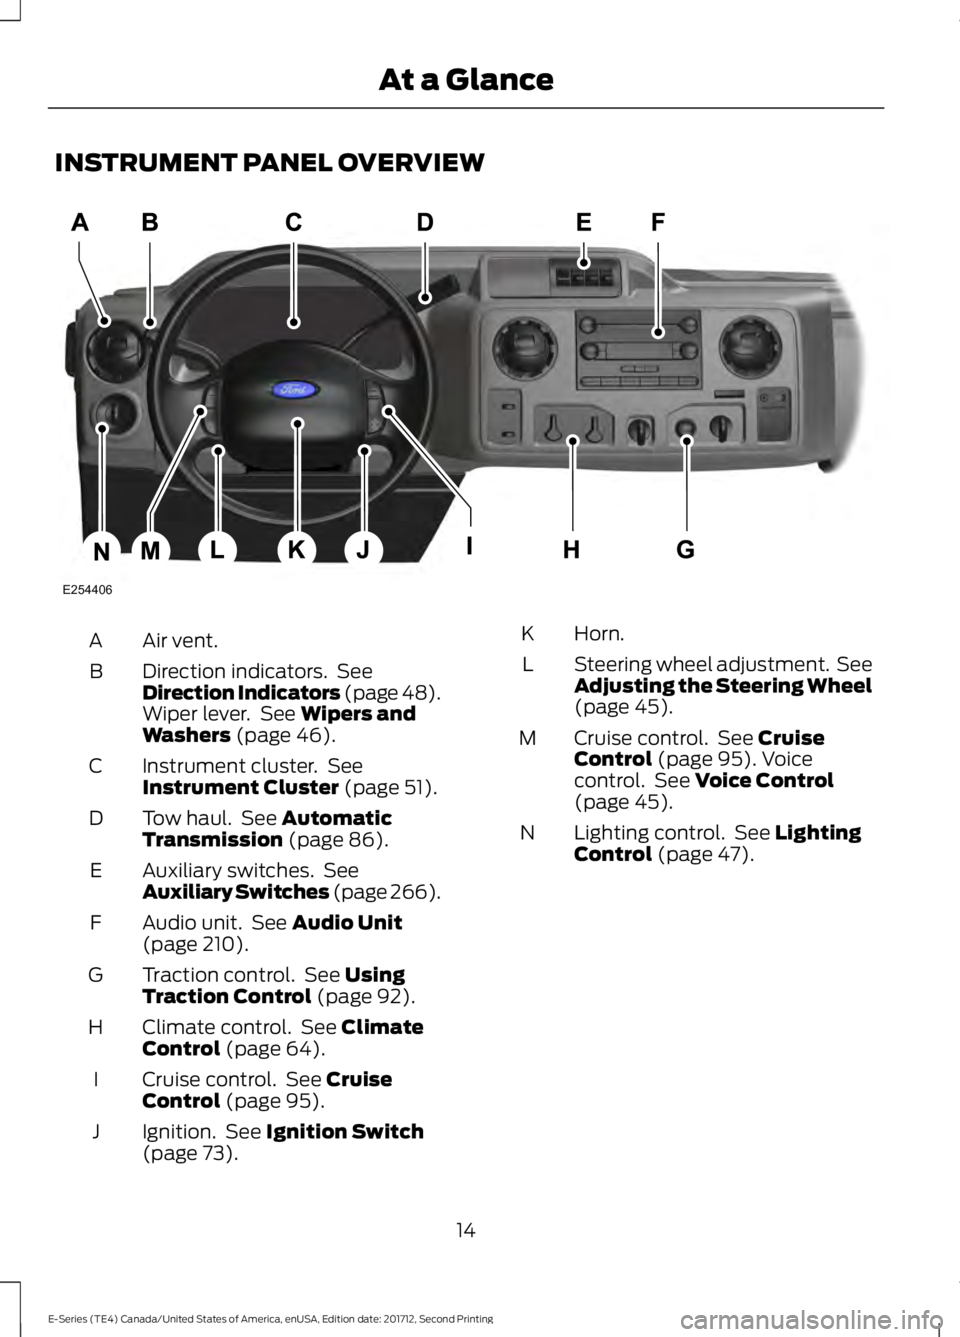 FORD E-350 2018  Owners Manual INSTRUMENT PANEL OVERVIEW
Air vent.
A
Direction indicators.  See
Direction Indicators (page 48).
Wiper lever.  See Wipers and
Washers (page 46).
B
Instrument cluster.  See
Instrument Cluster
 (page 51